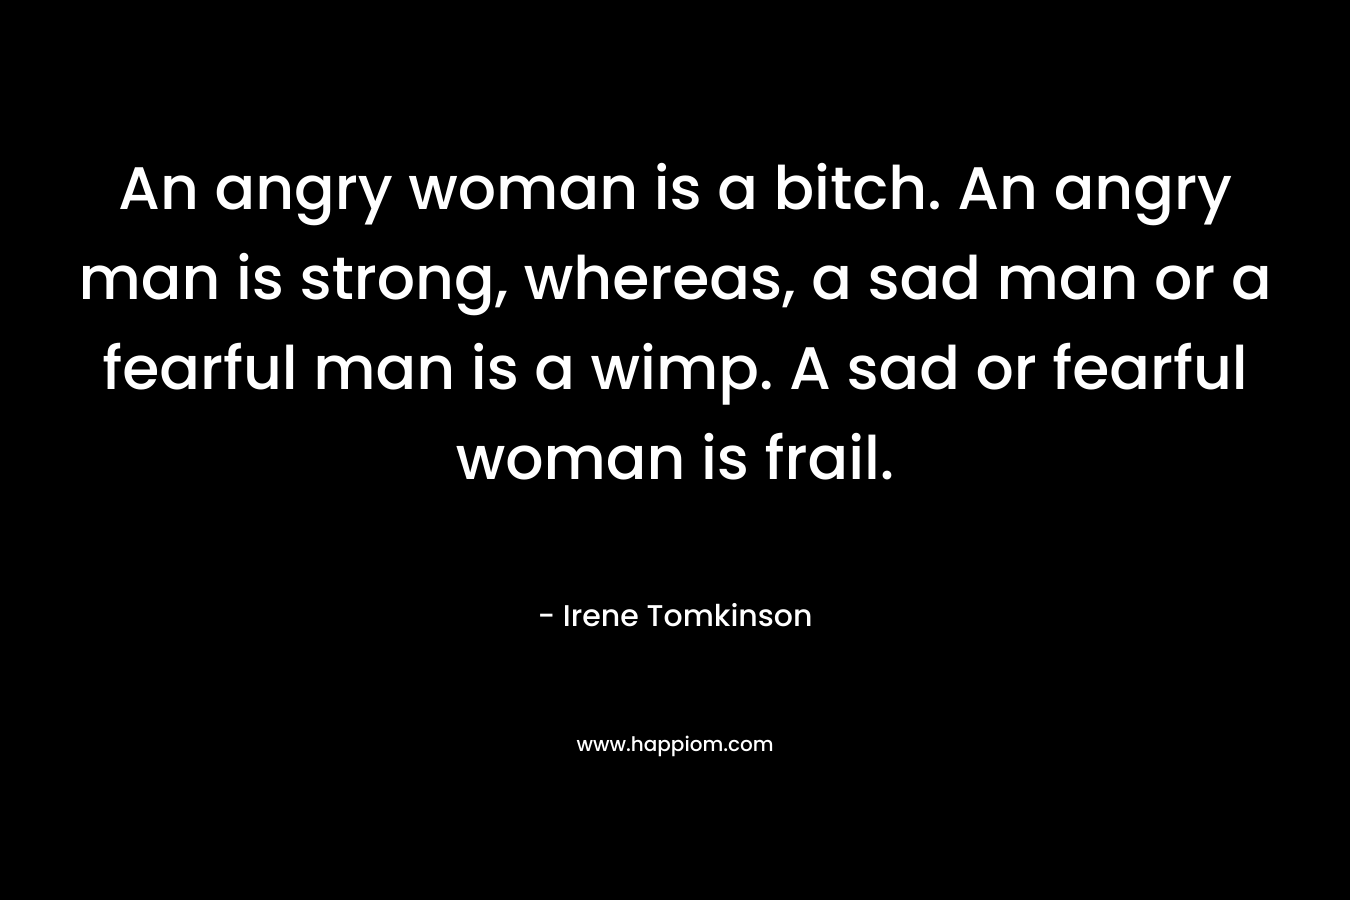 An angry woman is a bitch. An angry man is strong, whereas, a sad man or a fearful man is a wimp. A sad or fearful woman is frail. – Irene Tomkinson